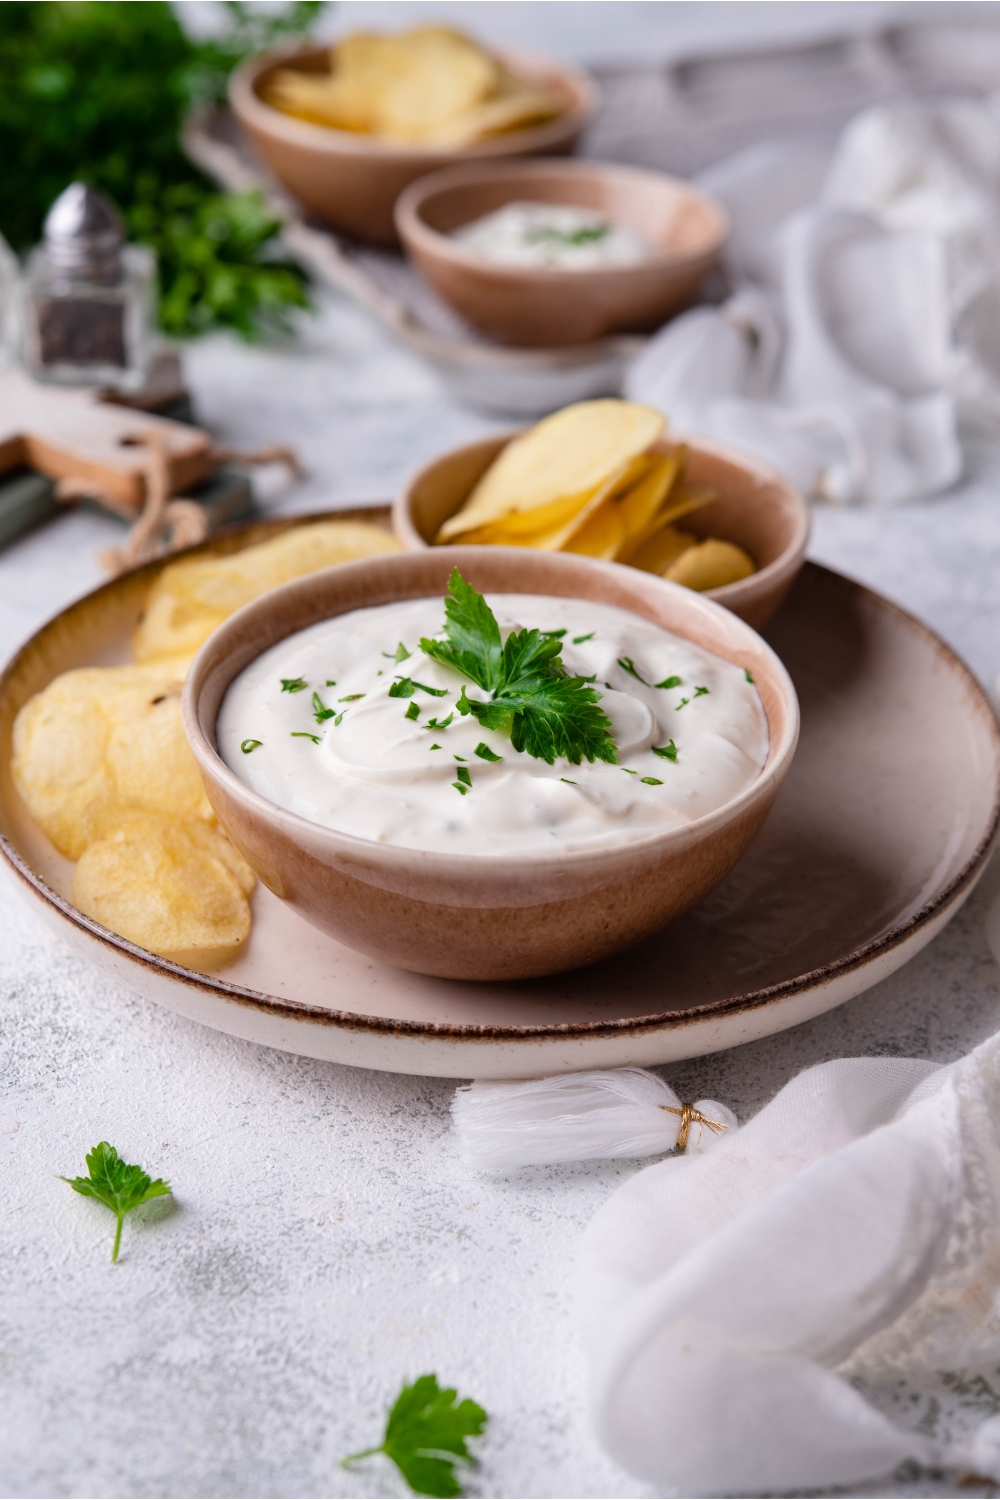 Sour cream dip garnished with fresh herbs in a brown bowl layered atop a brown plate. There are chips on the plate and in a small bowl next to the bowl of dip.